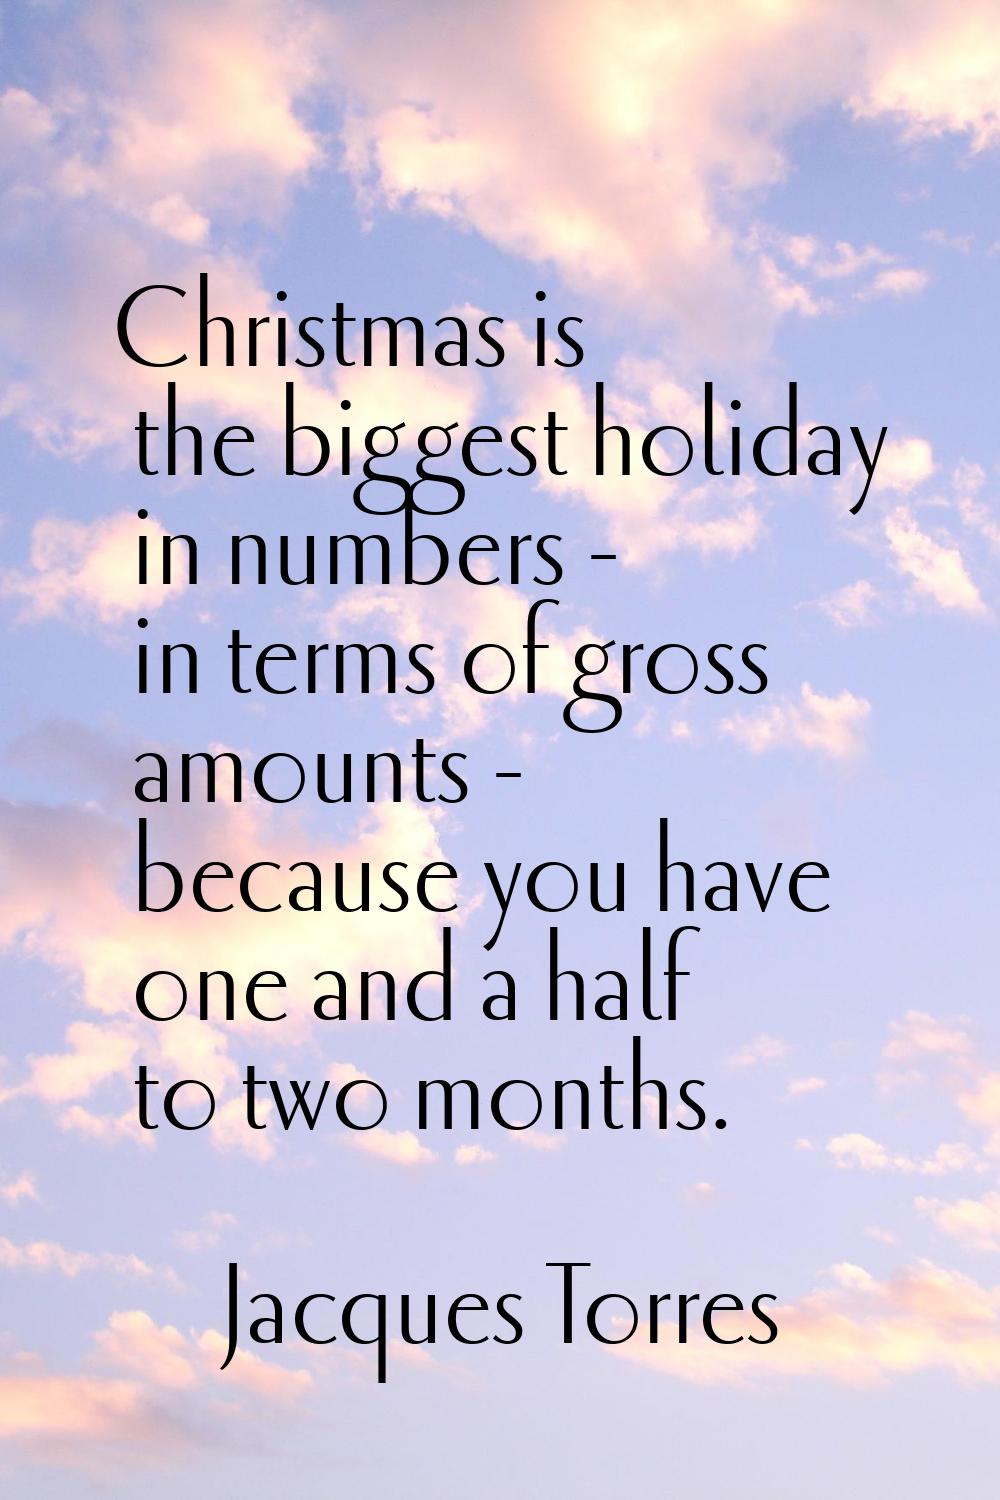 Christmas is the biggest holiday in numbers - in terms of gross amounts - because you have one and 